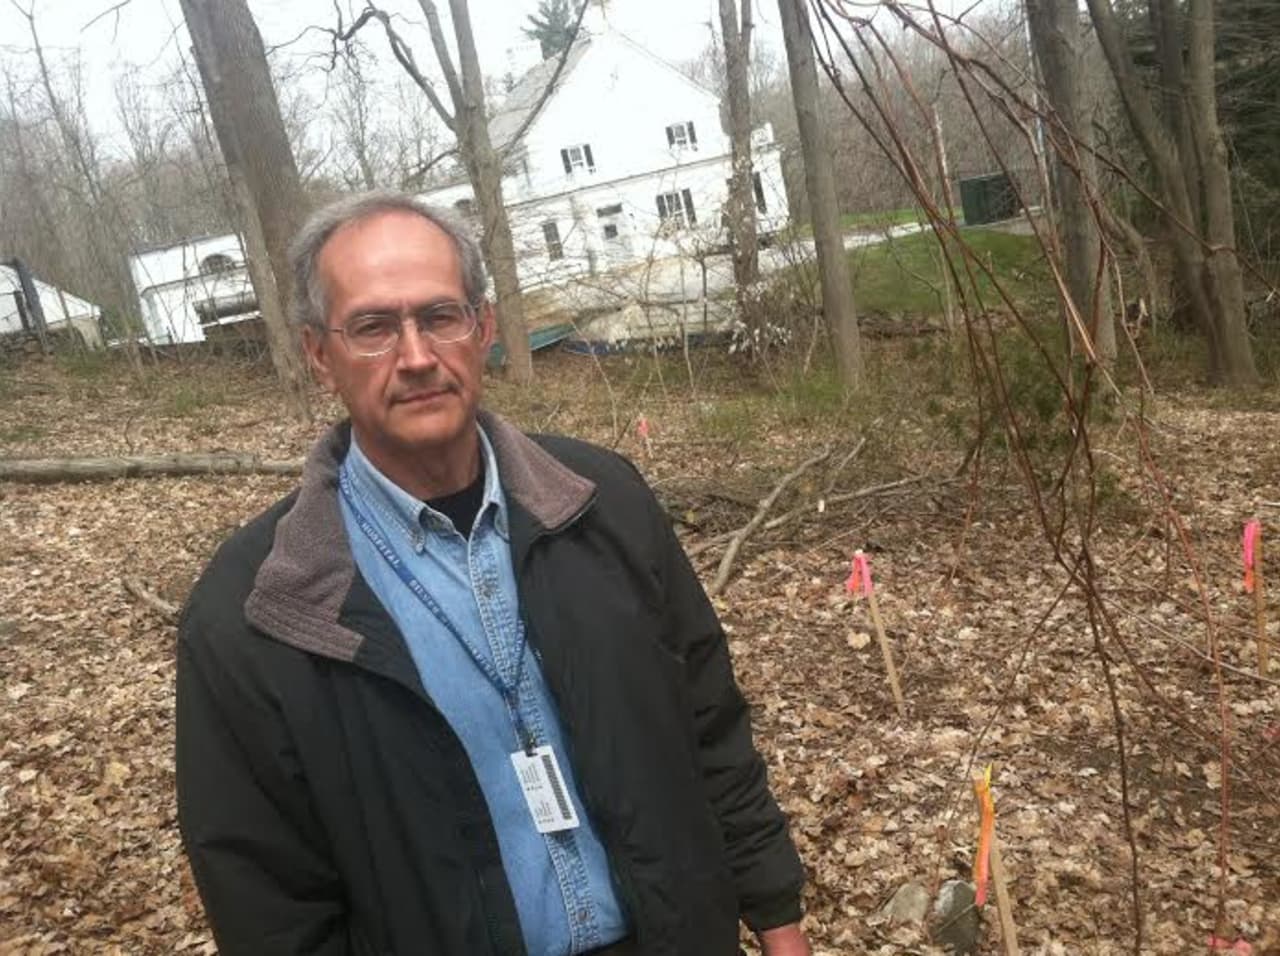 Silver Hill Hospital facility manager Frank Morabito stands on site of new cell tower in New Canaan.